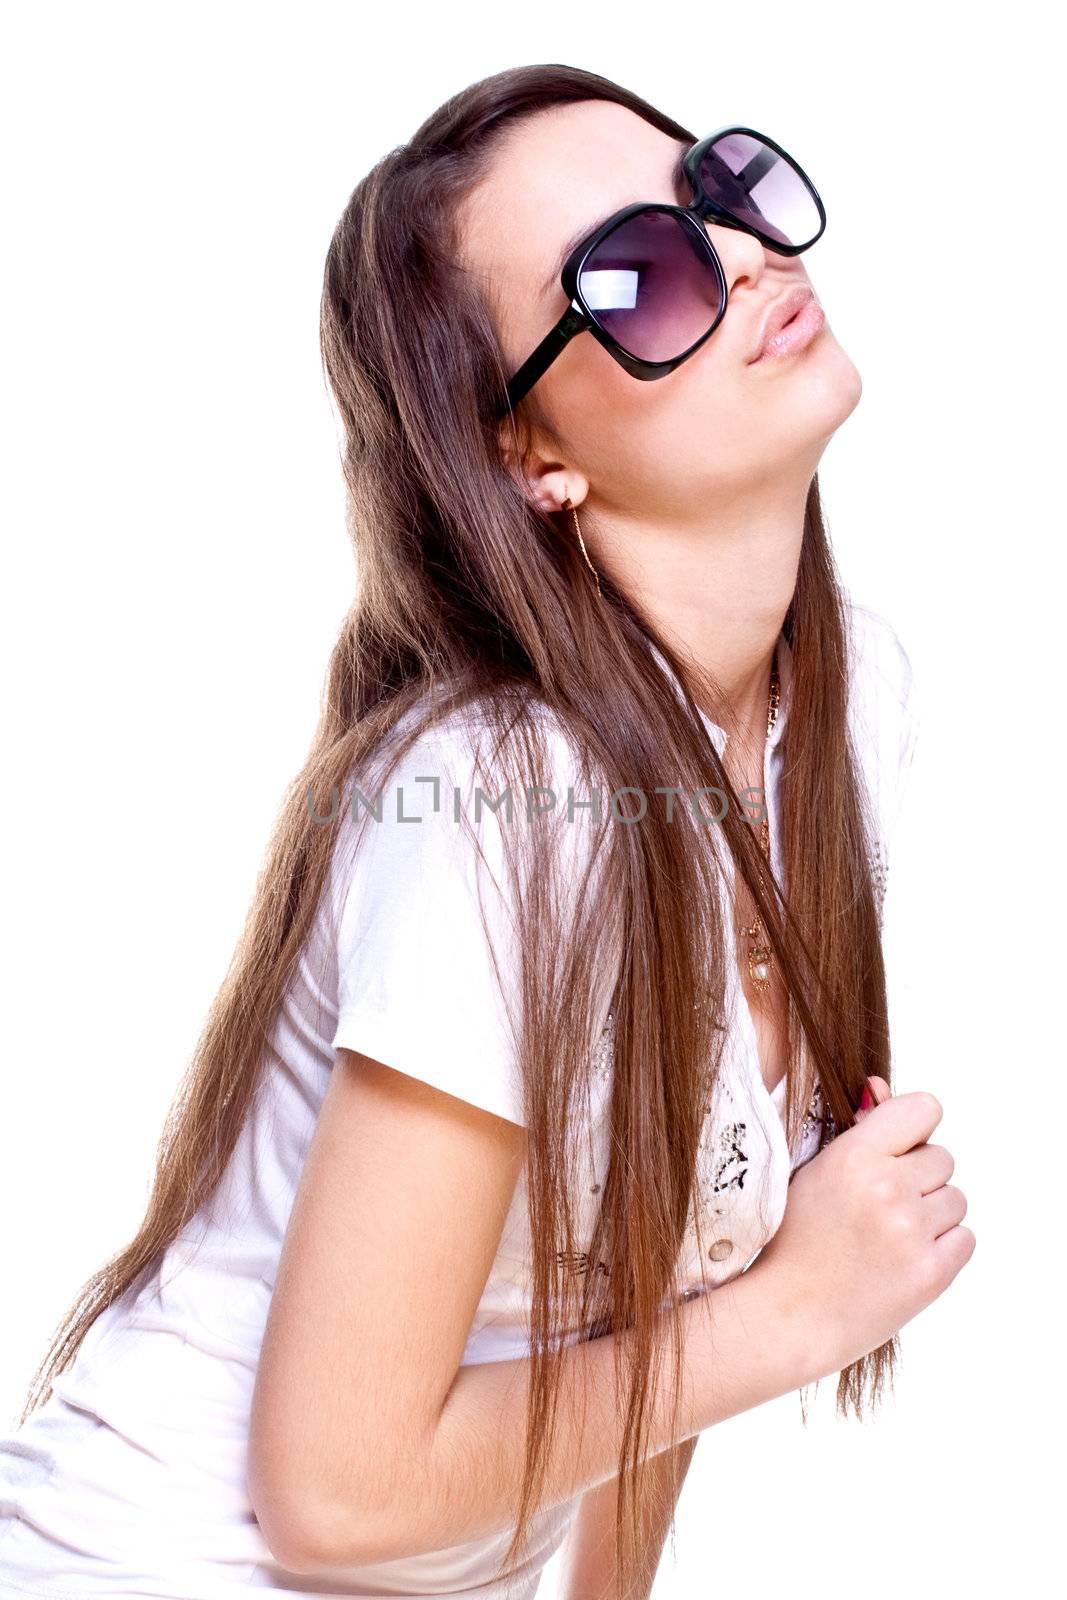 woman in a white shirt with the glasses on a white background